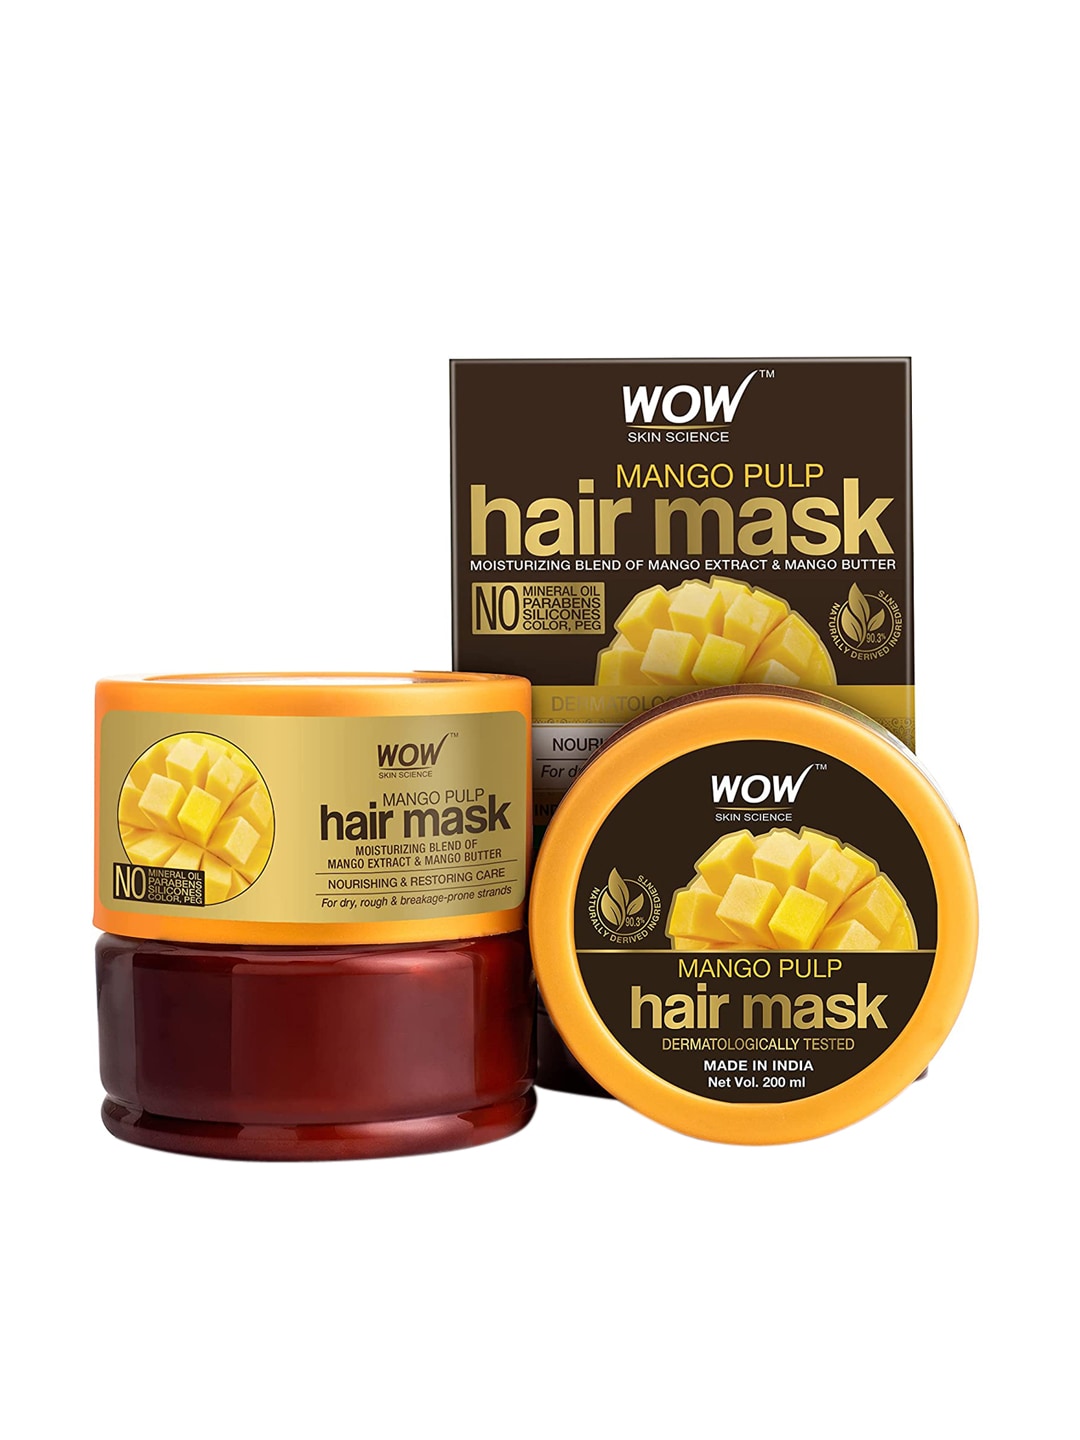 WOW SKIN SCIENCE Mango Pulp Hair Mask 200 ml Price in India